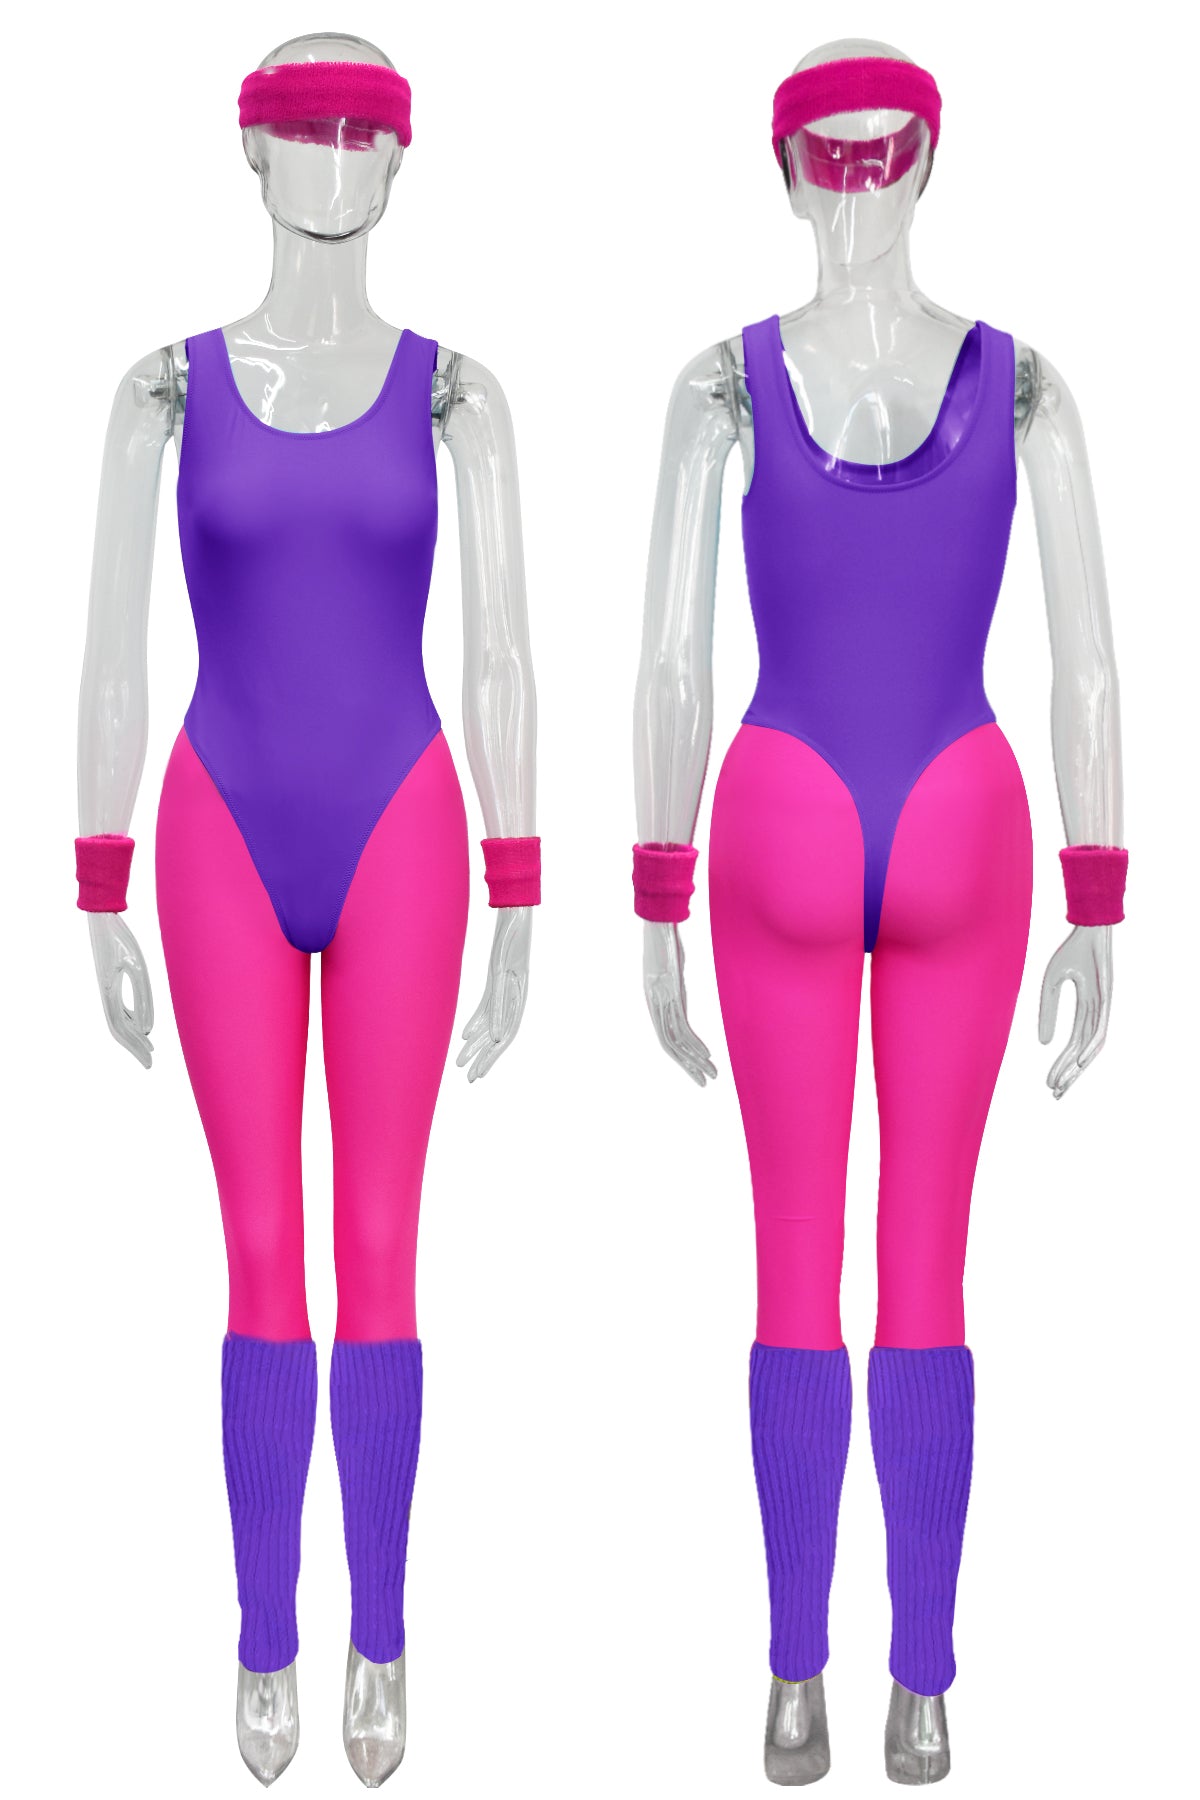 Women's 80s Workout Costume